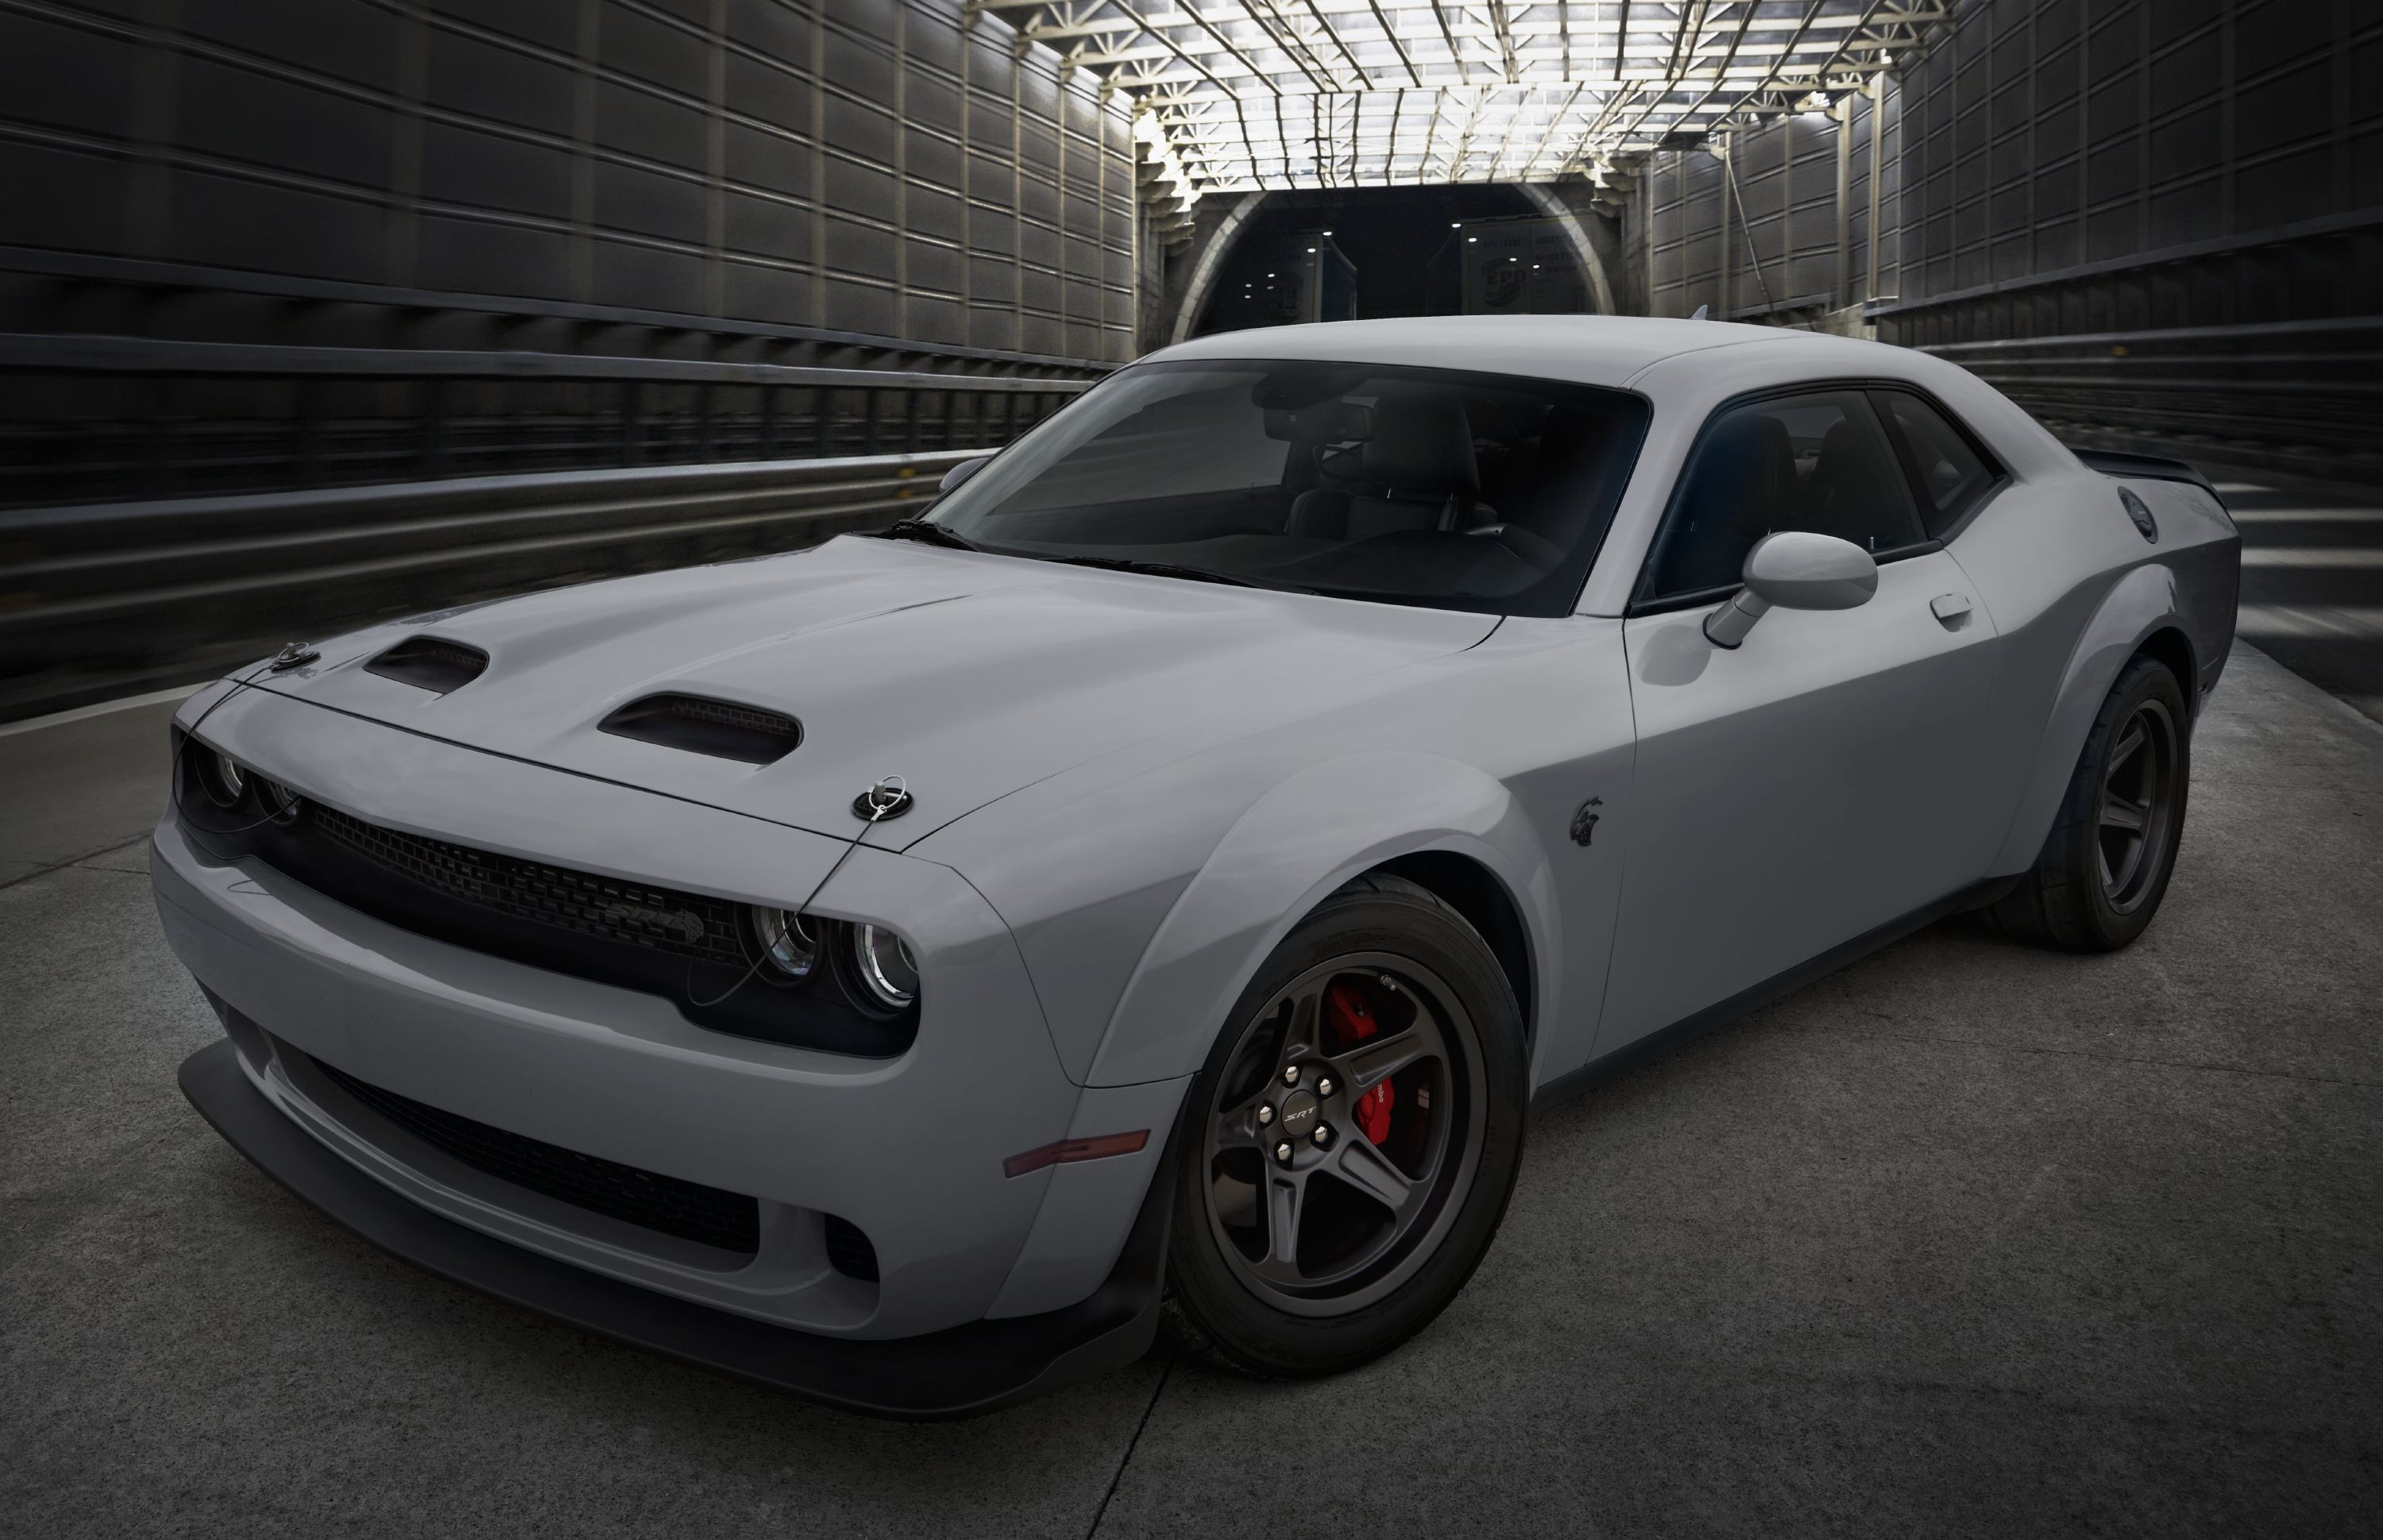  2023 Hellcat Dodge Charger Price